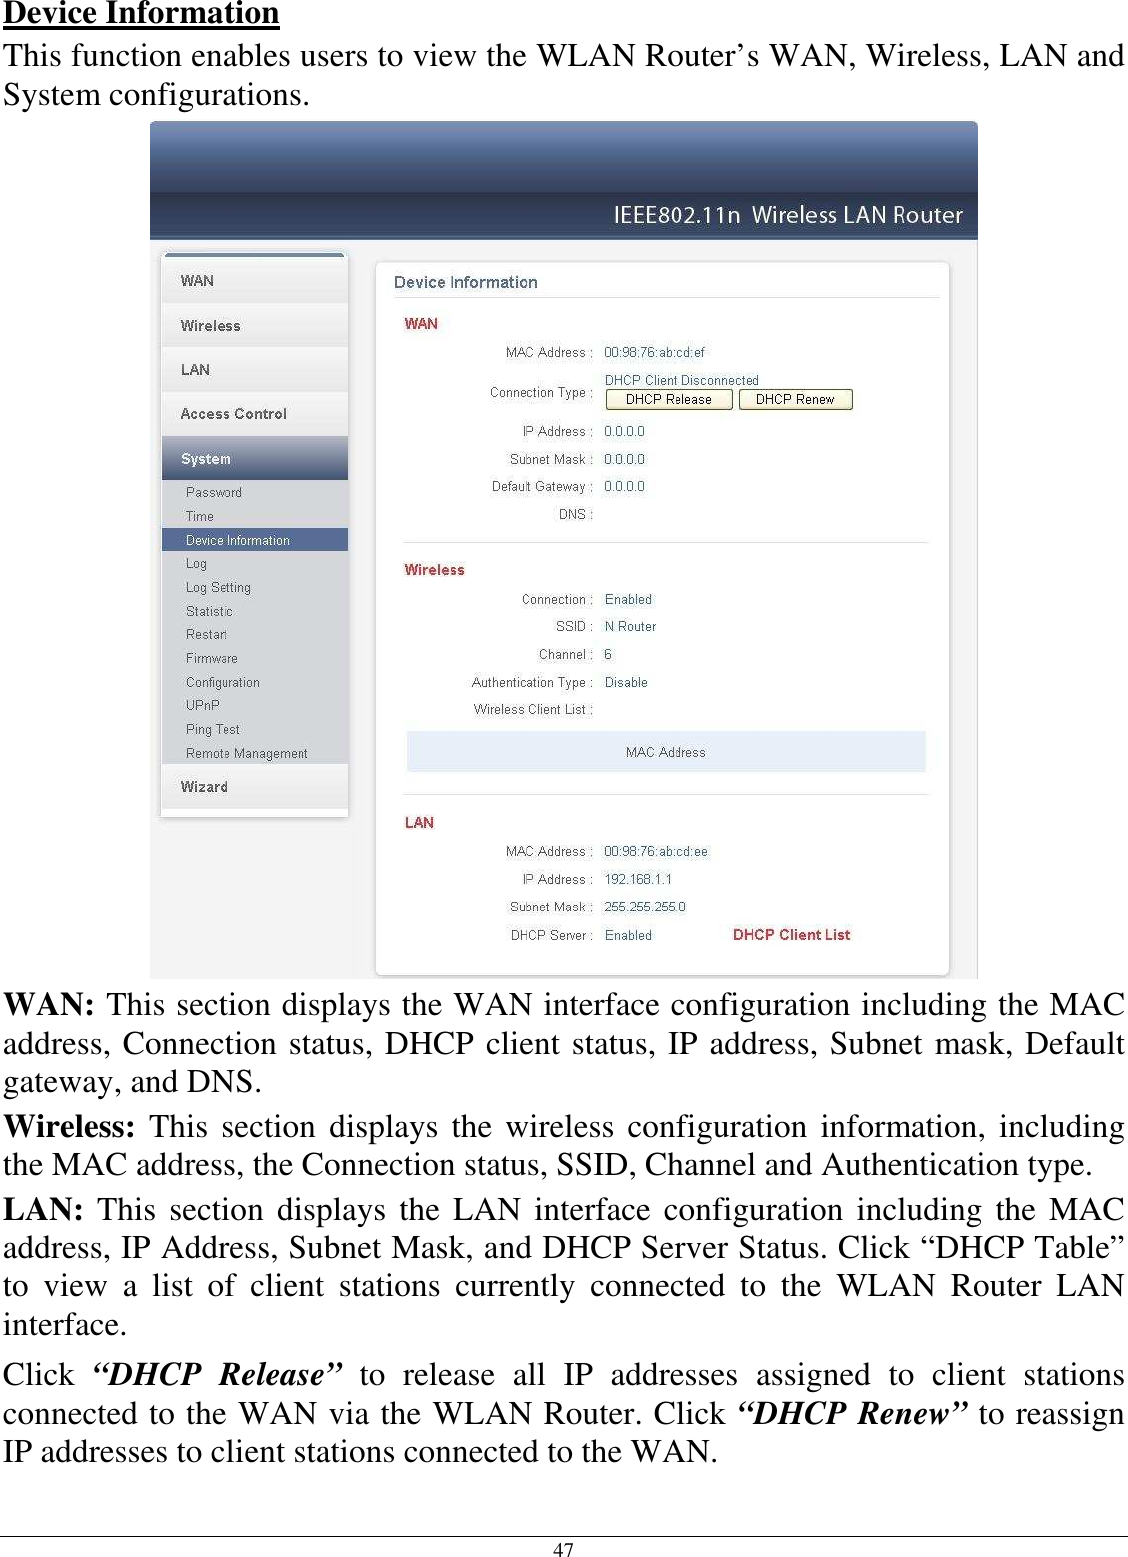 47 Device Information This function enables users to view the WLAN Router’s WAN, Wireless, LAN and System configurations.  WAN: This section displays the WAN interface configuration including the MAC address, Connection status, DHCP client status, IP address, Subnet mask, Default gateway, and DNS.  Wireless:  This section displays  the  wireless configuration information,  including the MAC address, the Connection status, SSID, Channel and Authentication type. LAN: This section displays the LAN interface  configuration including  the  MAC address, IP Address, Subnet Mask, and DHCP Server Status. Click “DHCP Table” to  view  a  list  of  client  stations  currently  connected  to  the  WLAN  Router  LAN interface. Click  “DHCP  Release”  to  release  all  IP  addresses  assigned  to  client  stations connected to the WAN via the WLAN Router. Click “DHCP Renew” to reassign IP addresses to client stations connected to the WAN. 